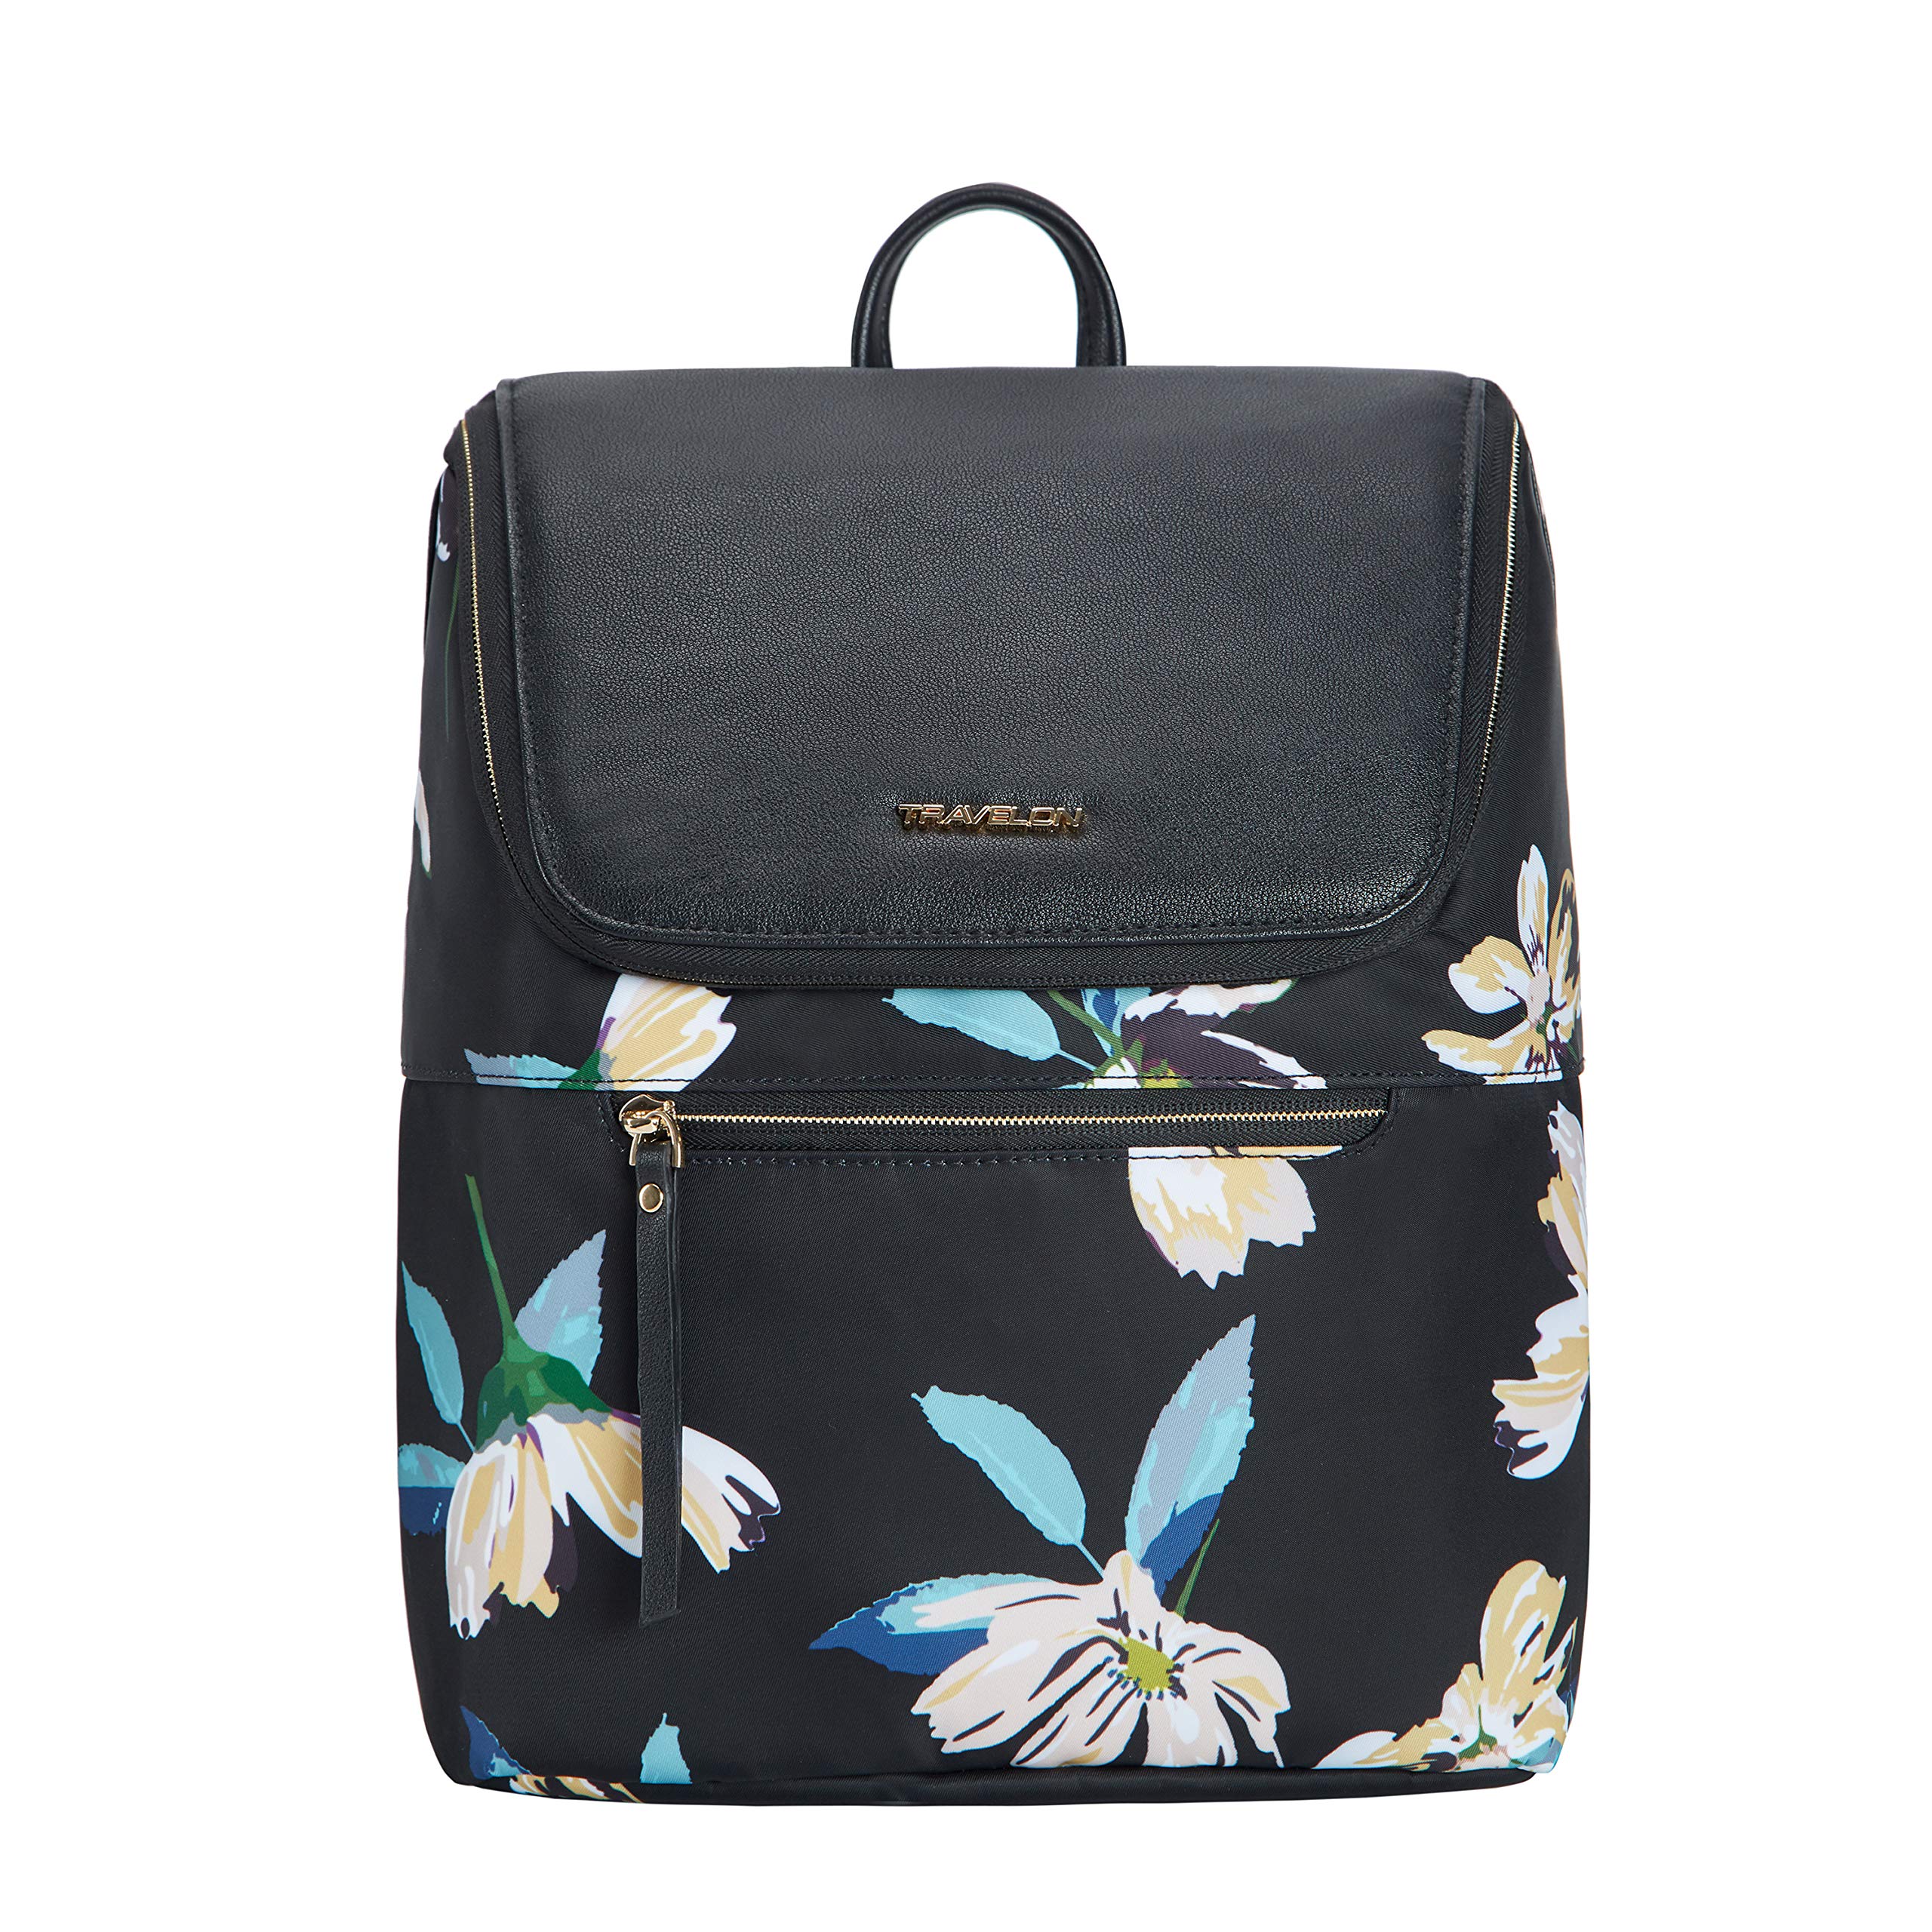 Travelon Addison-Anti-Theft Backpack, Midnight Floral, One Size